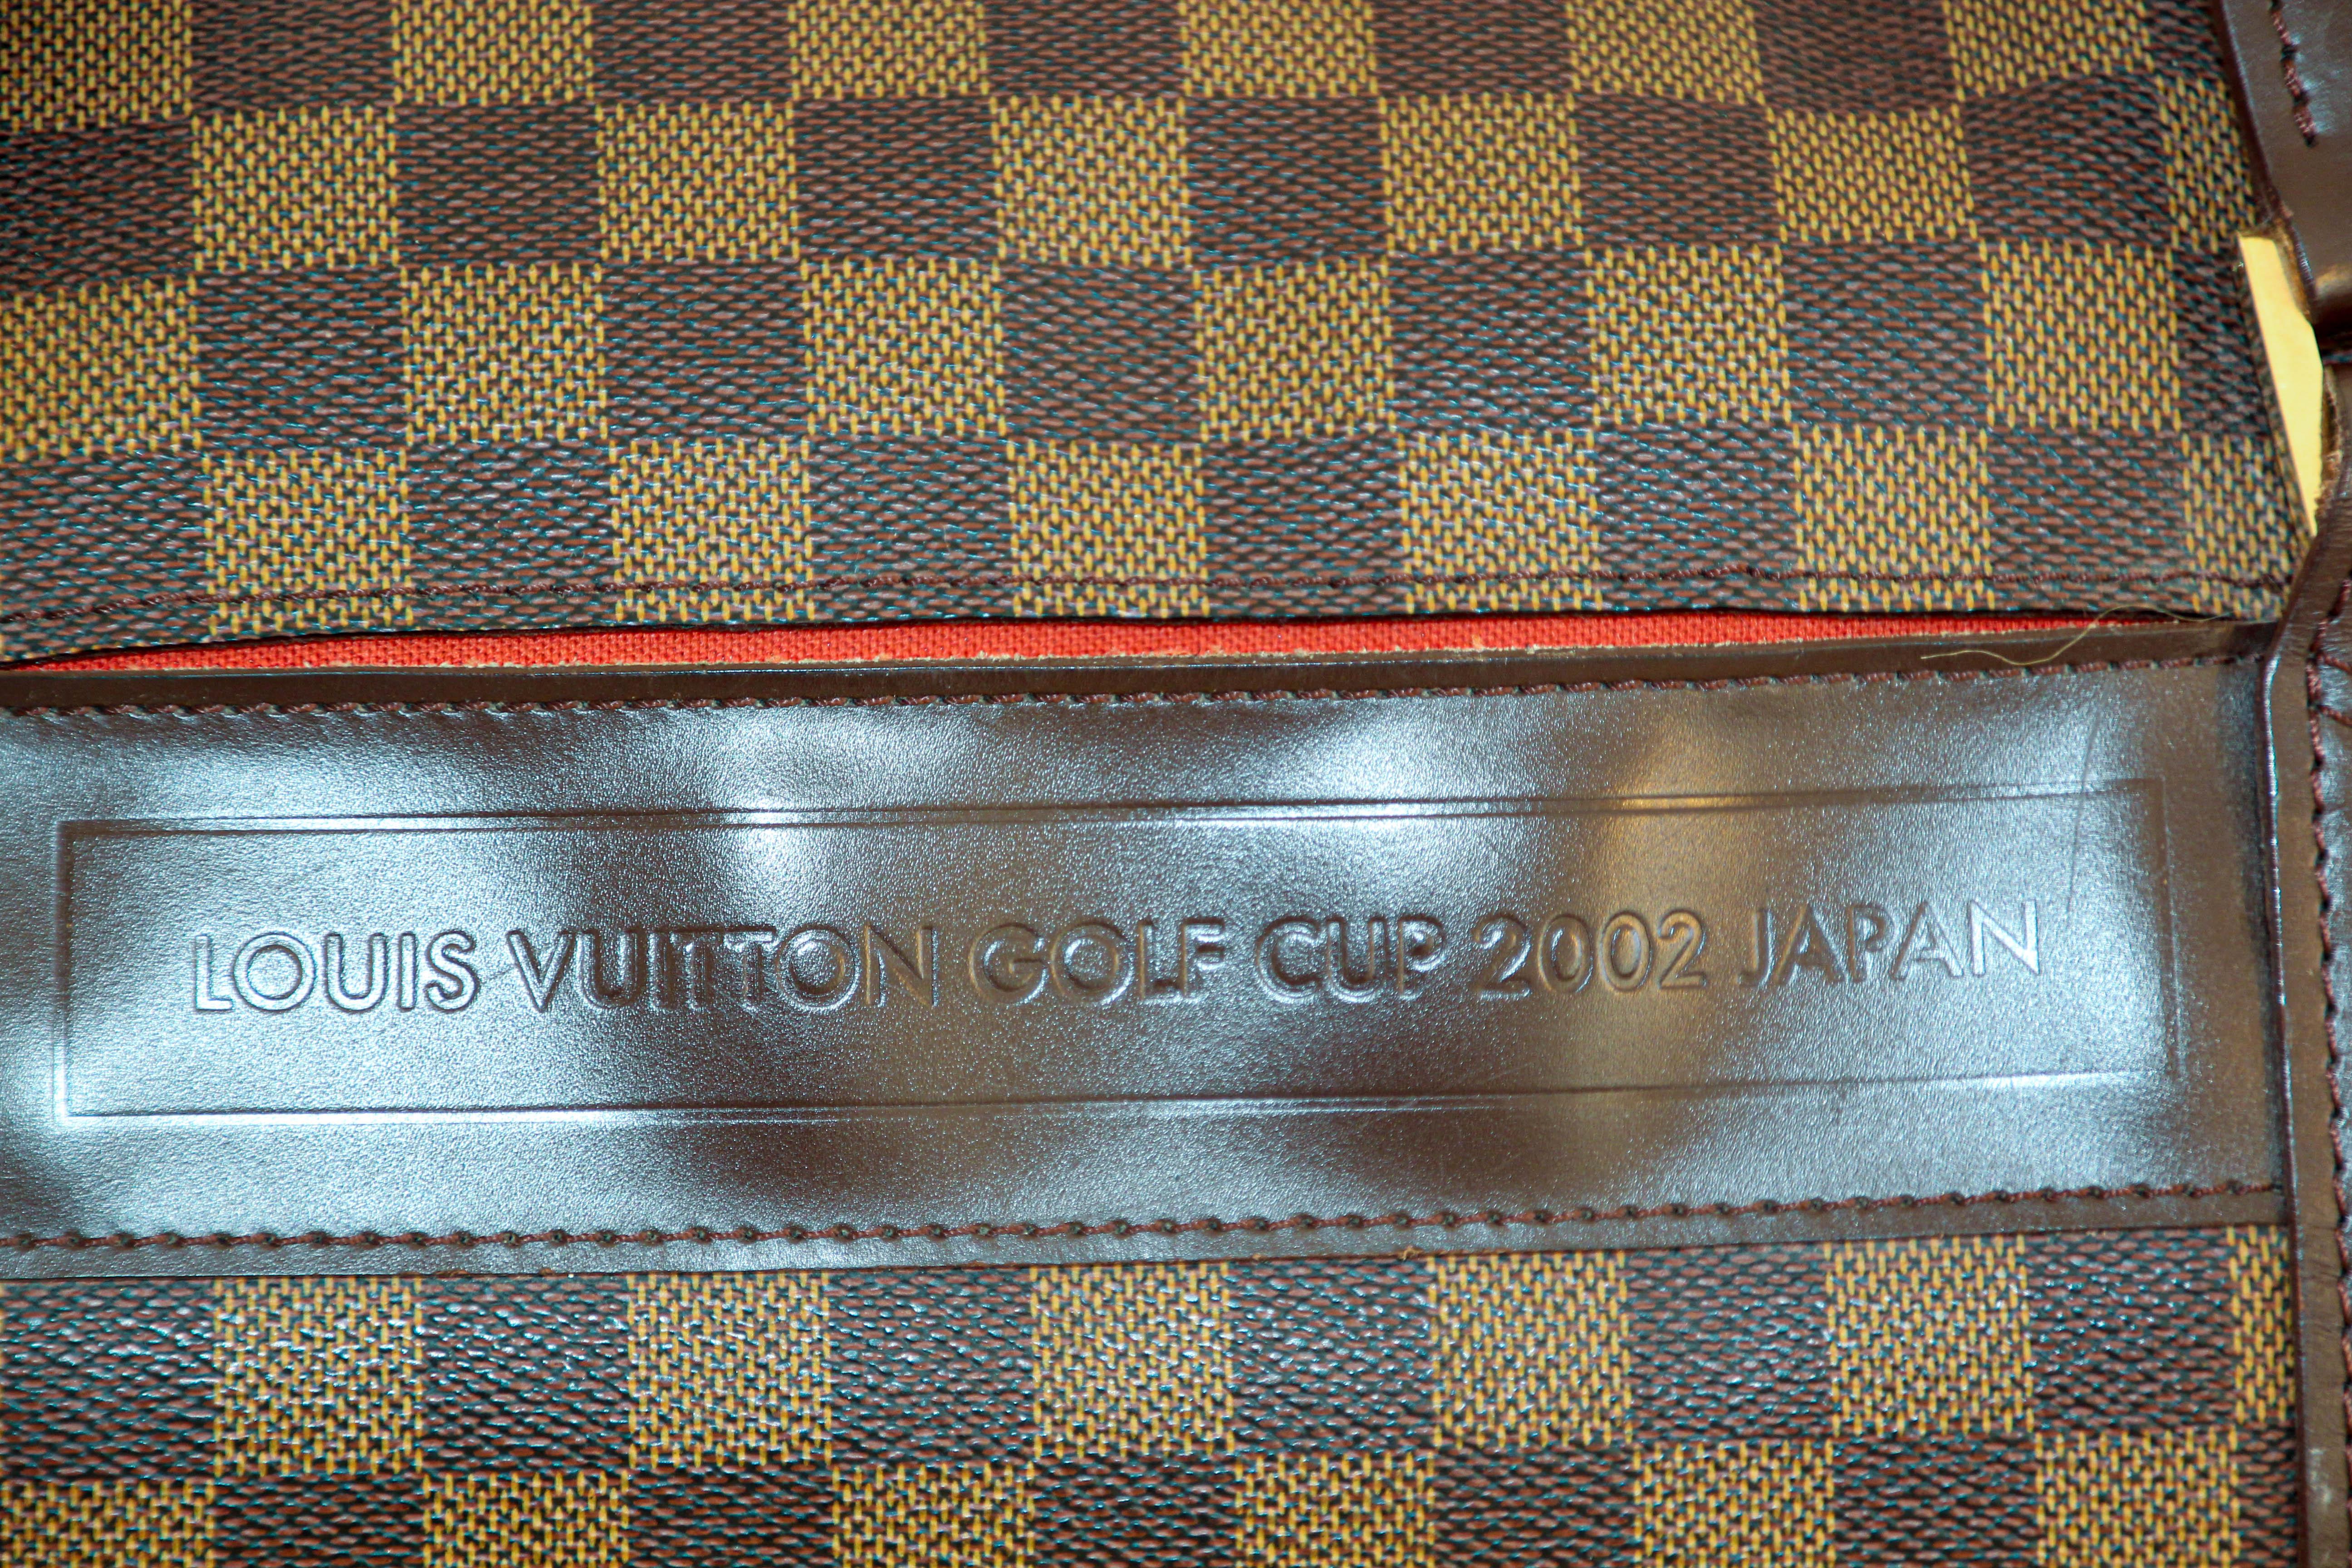 Louis Vuitton Golf Cup 2002 Japan Sac Polochon Duffle Damier In Good Condition For Sale In North Hollywood, CA